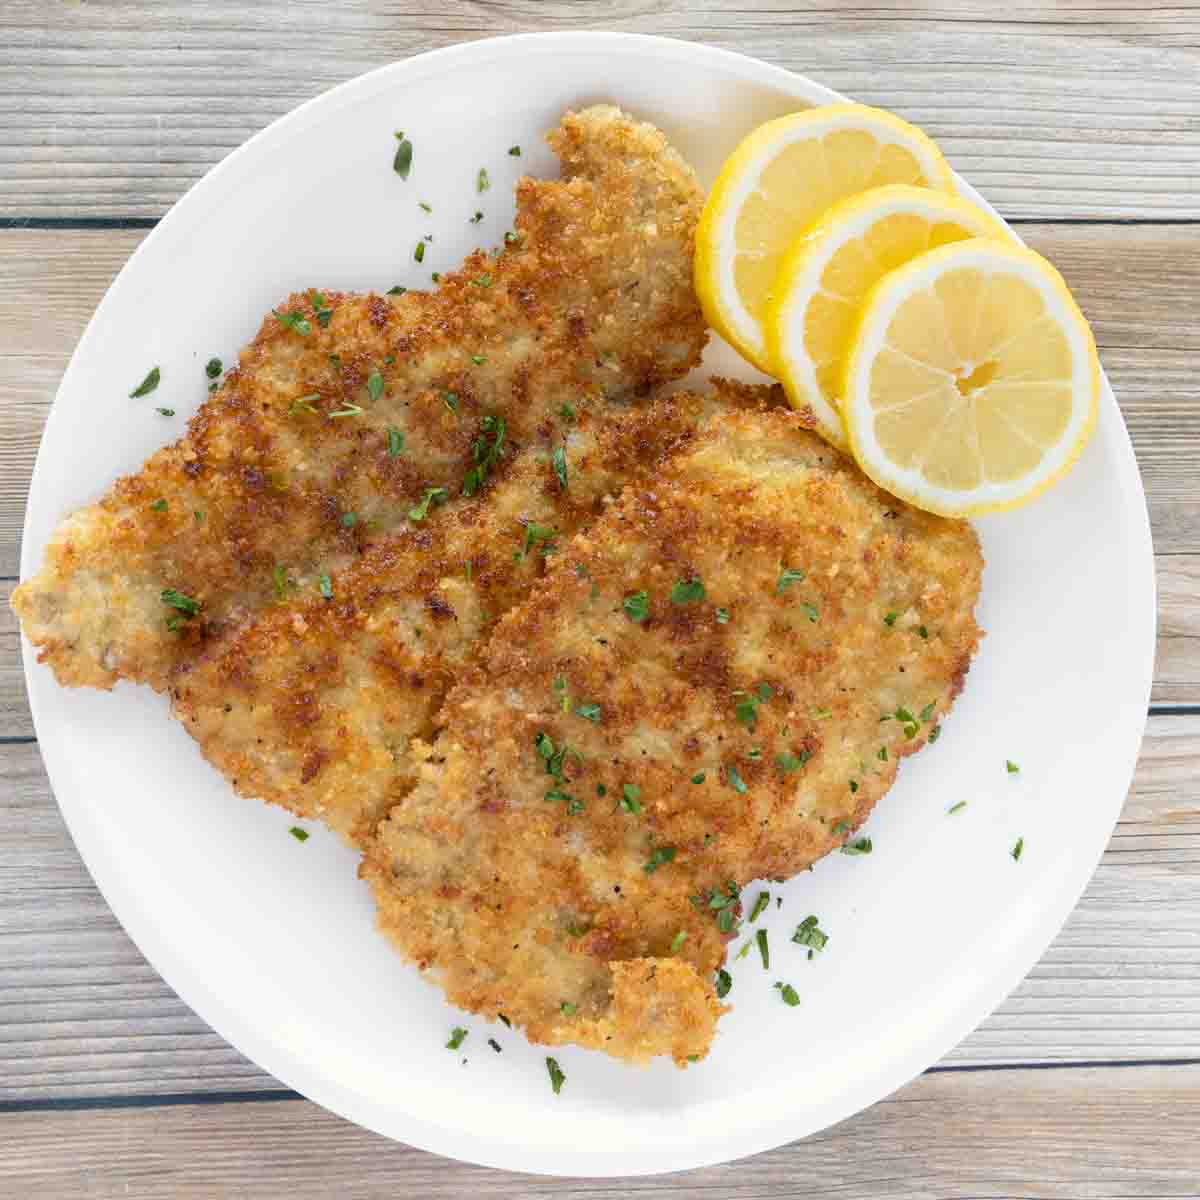 Wiener Schnitzel (veal schnitzel) on a white plate with lemon circles.